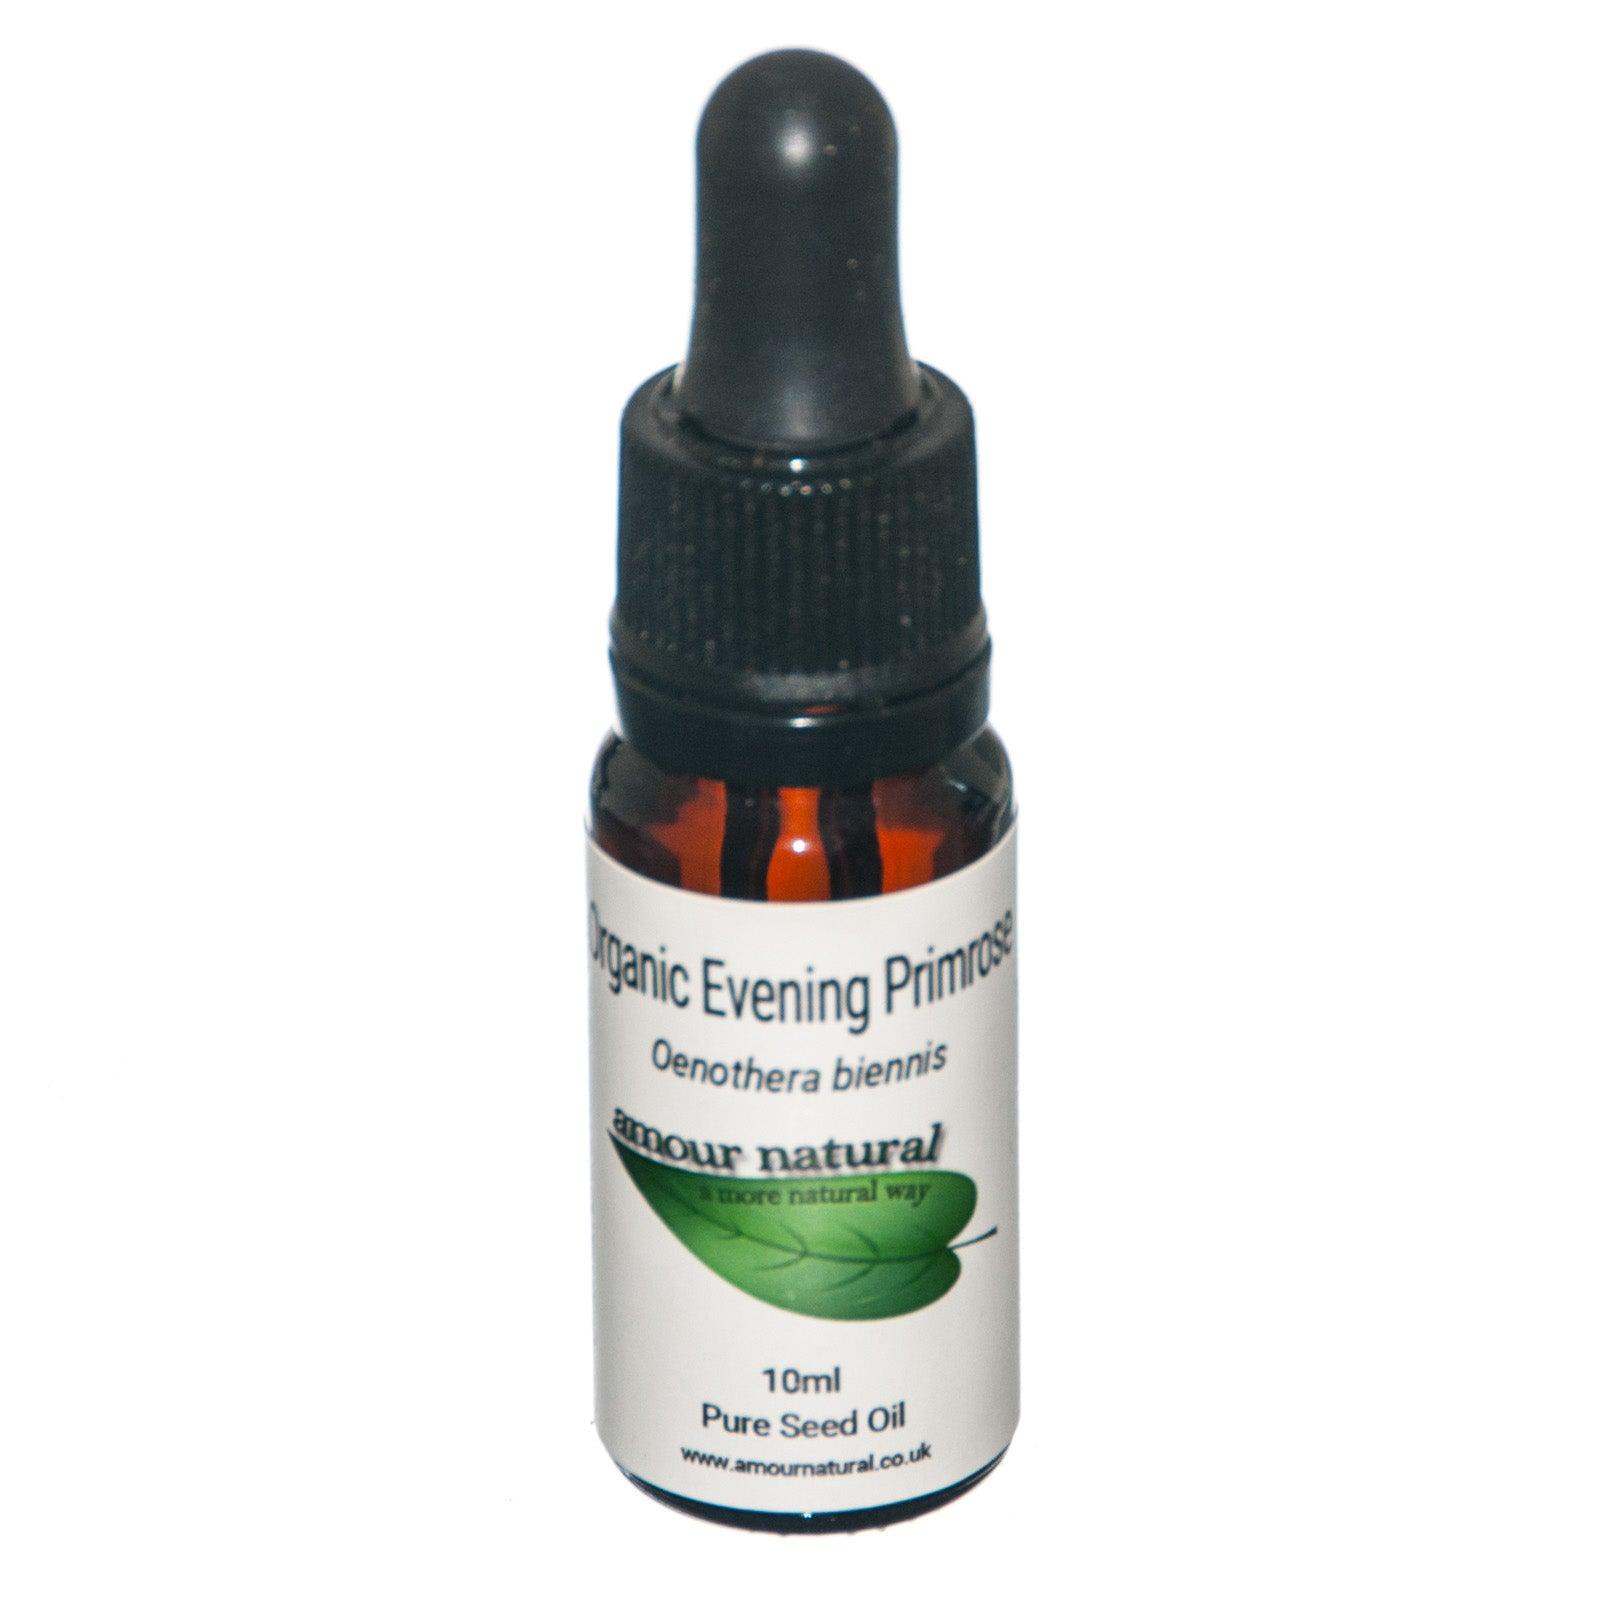 Amour Natural Organic Evening Primrose Oil 10ml - Approved Vitamins